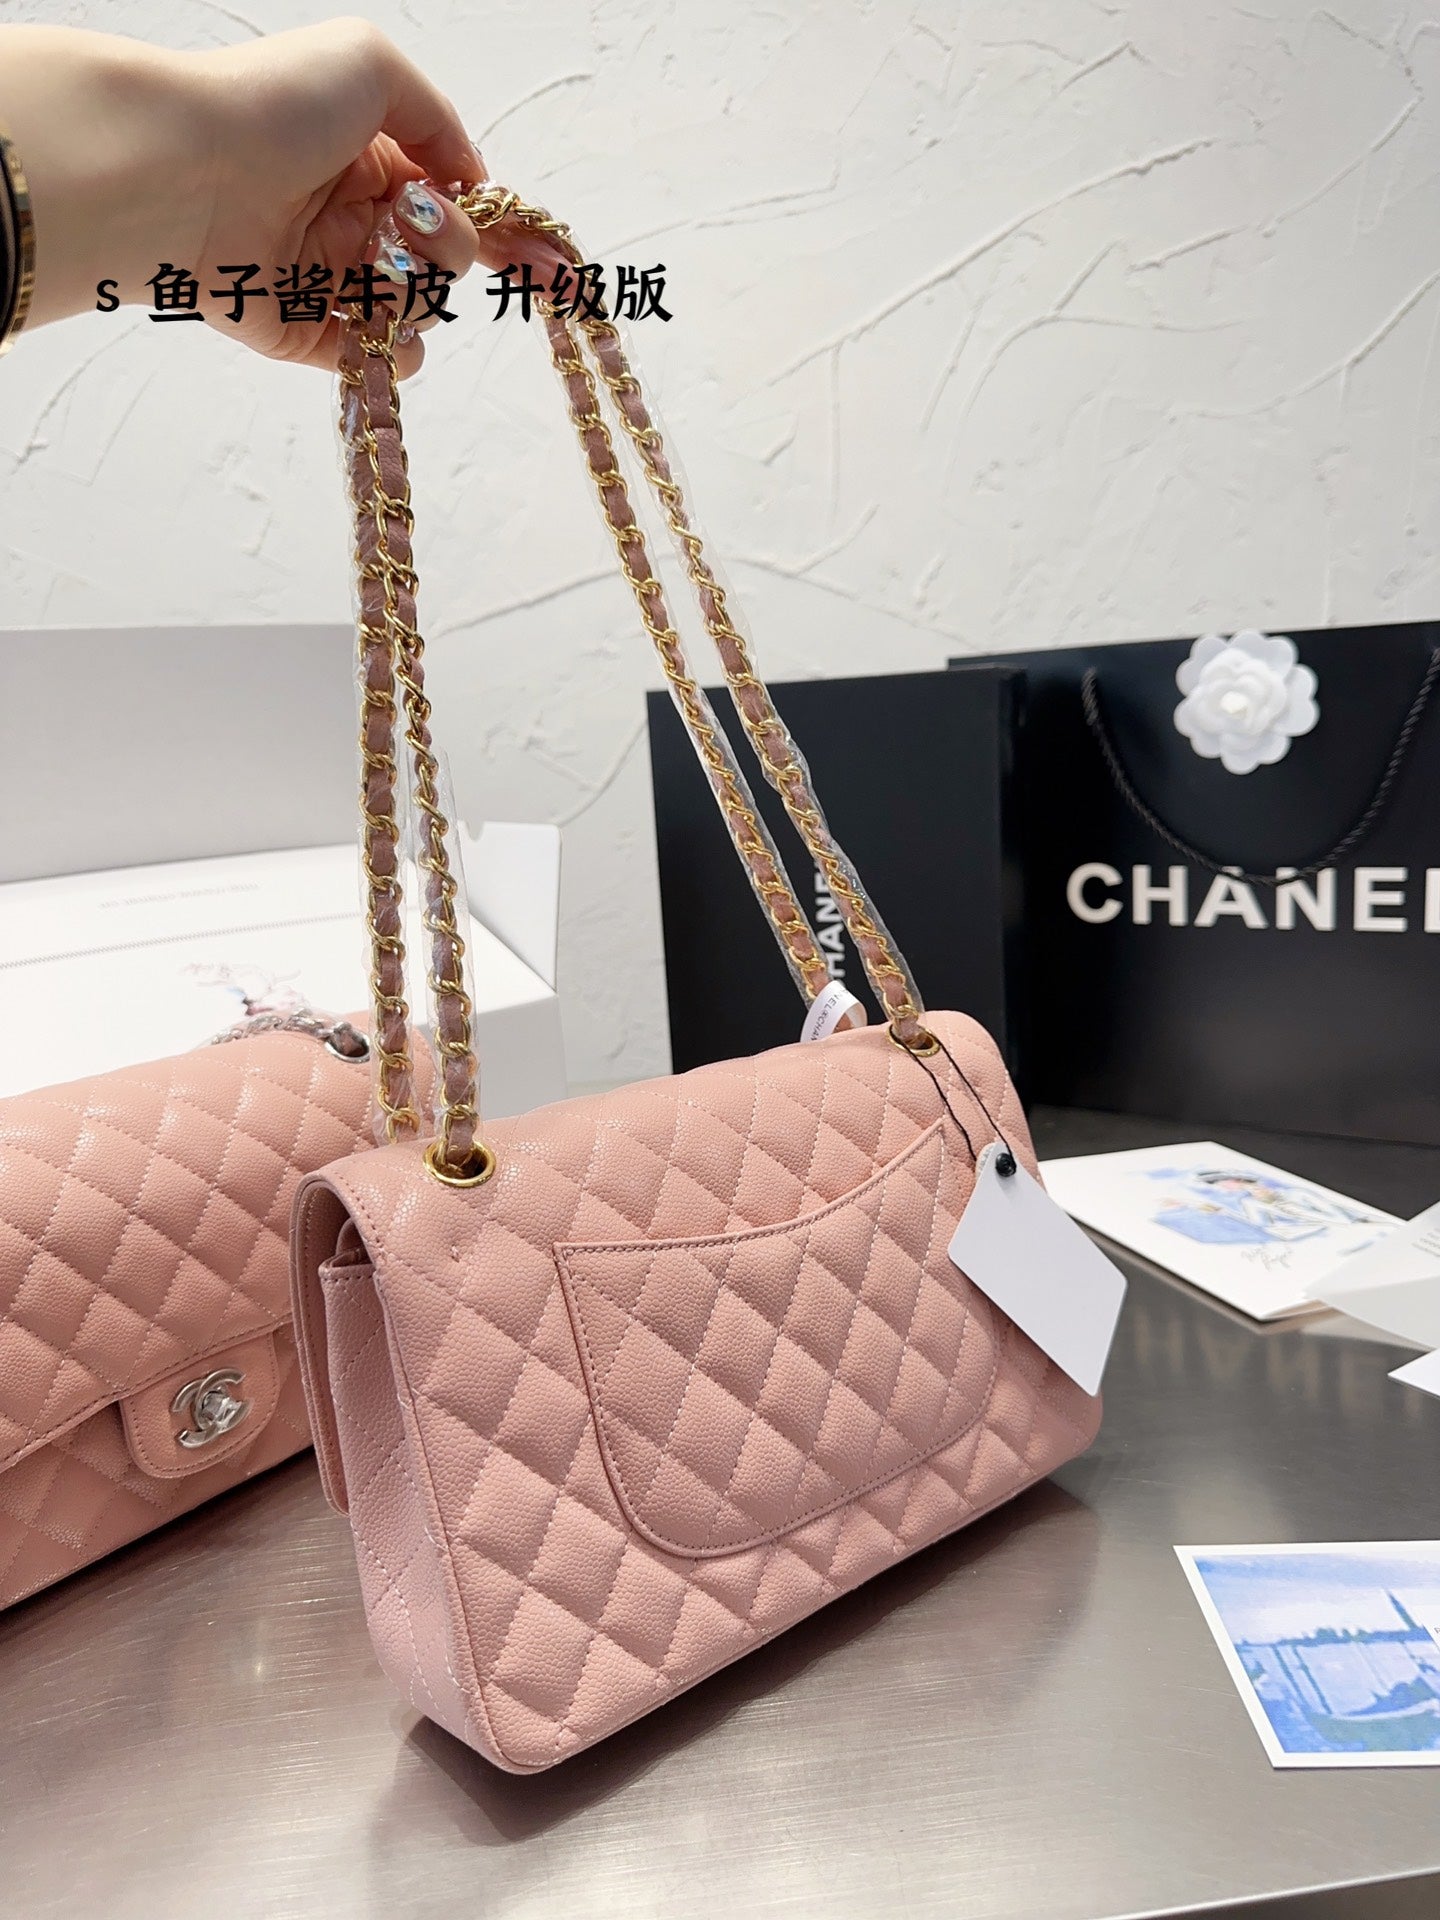 chanel backpack dhgate